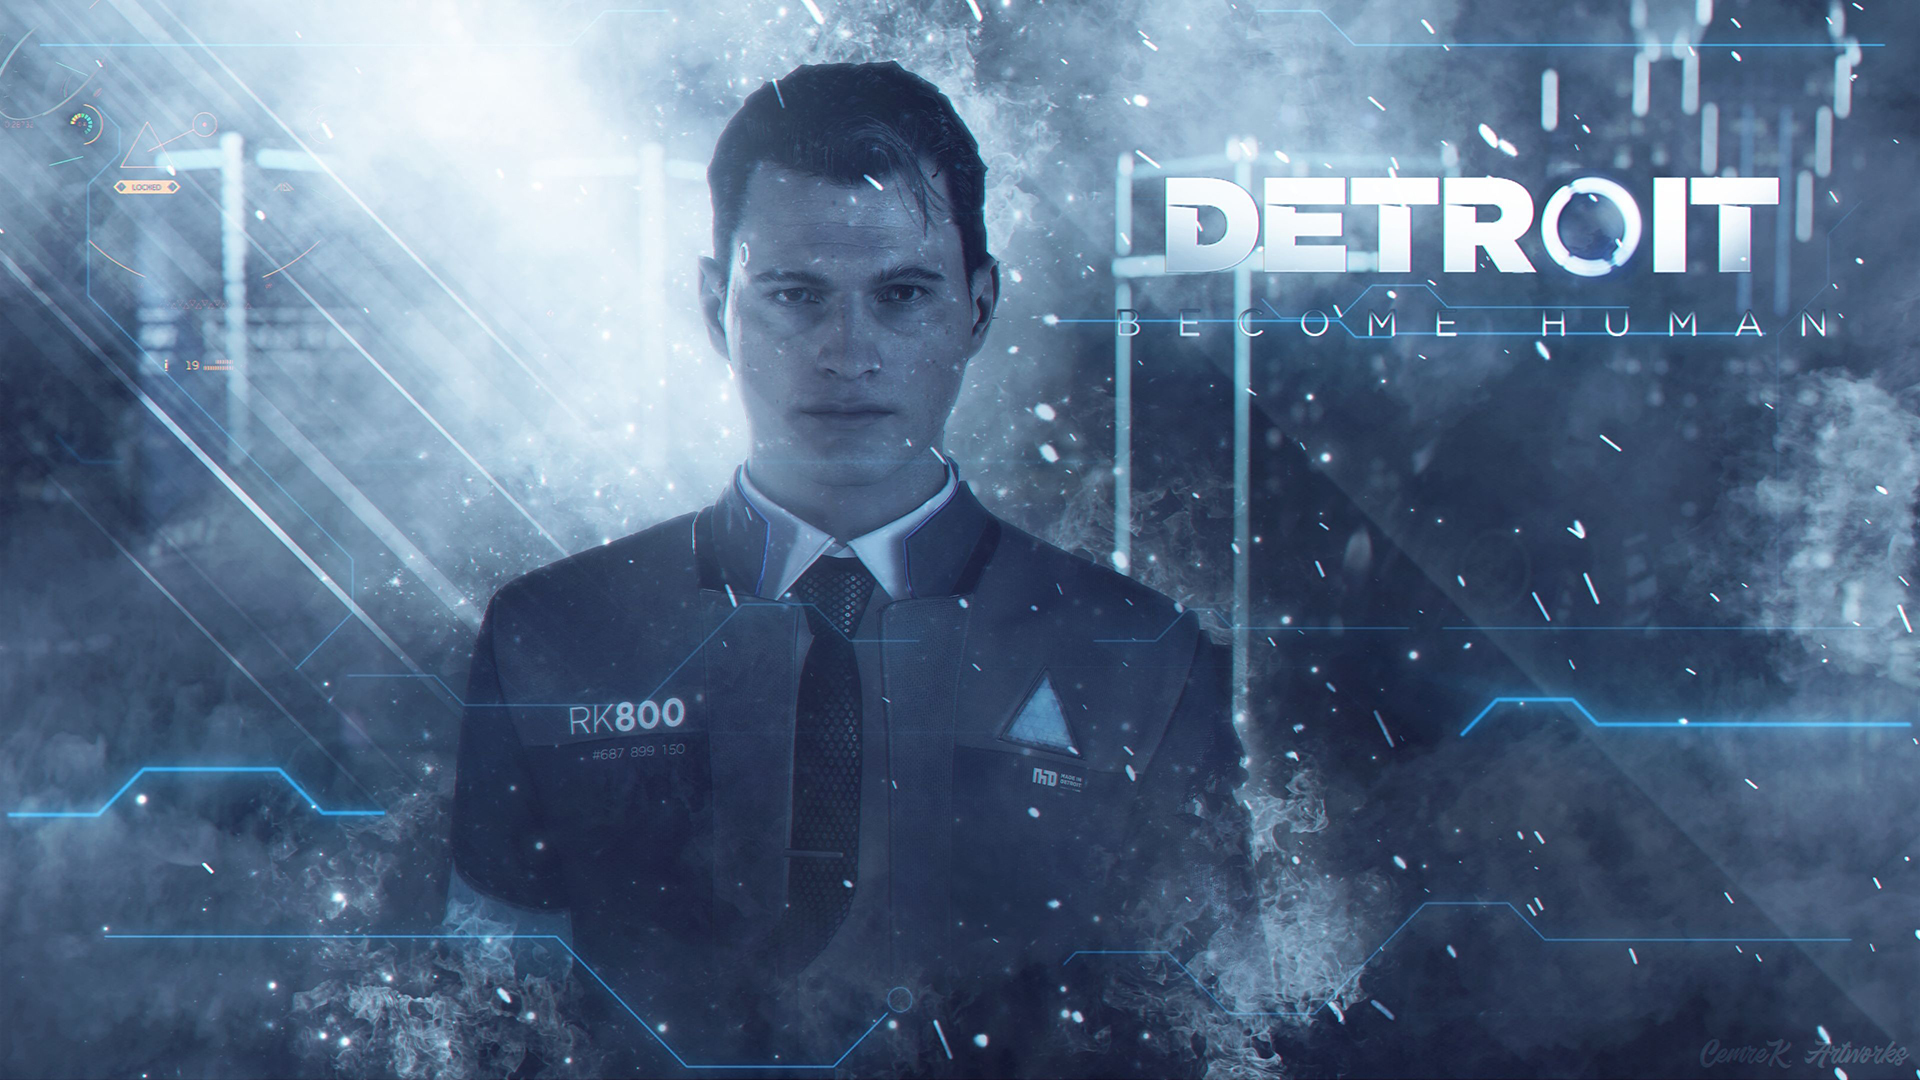 Detroit: Become Human Images - LaunchBox Games Database